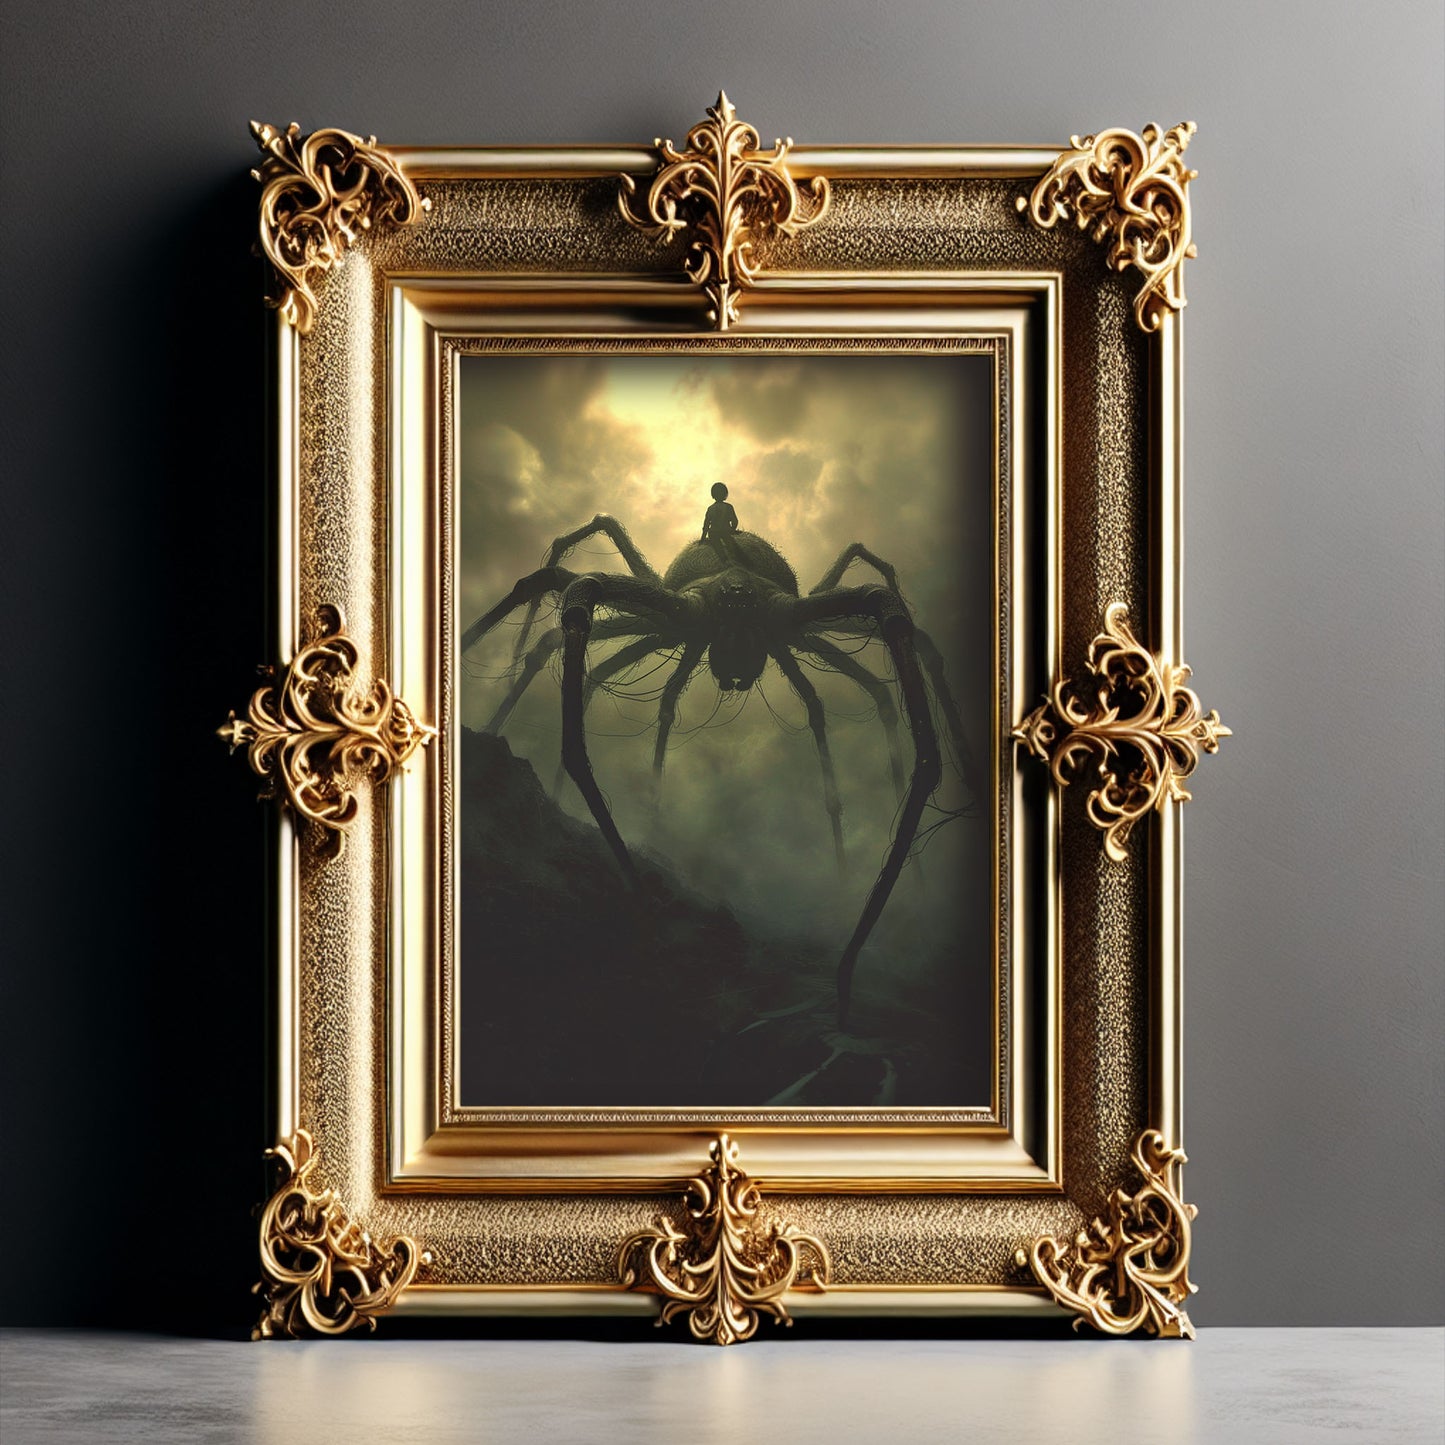 Spooky Spiderboy Wall Art: Huge Creepy Spider Poster - Gothic Print